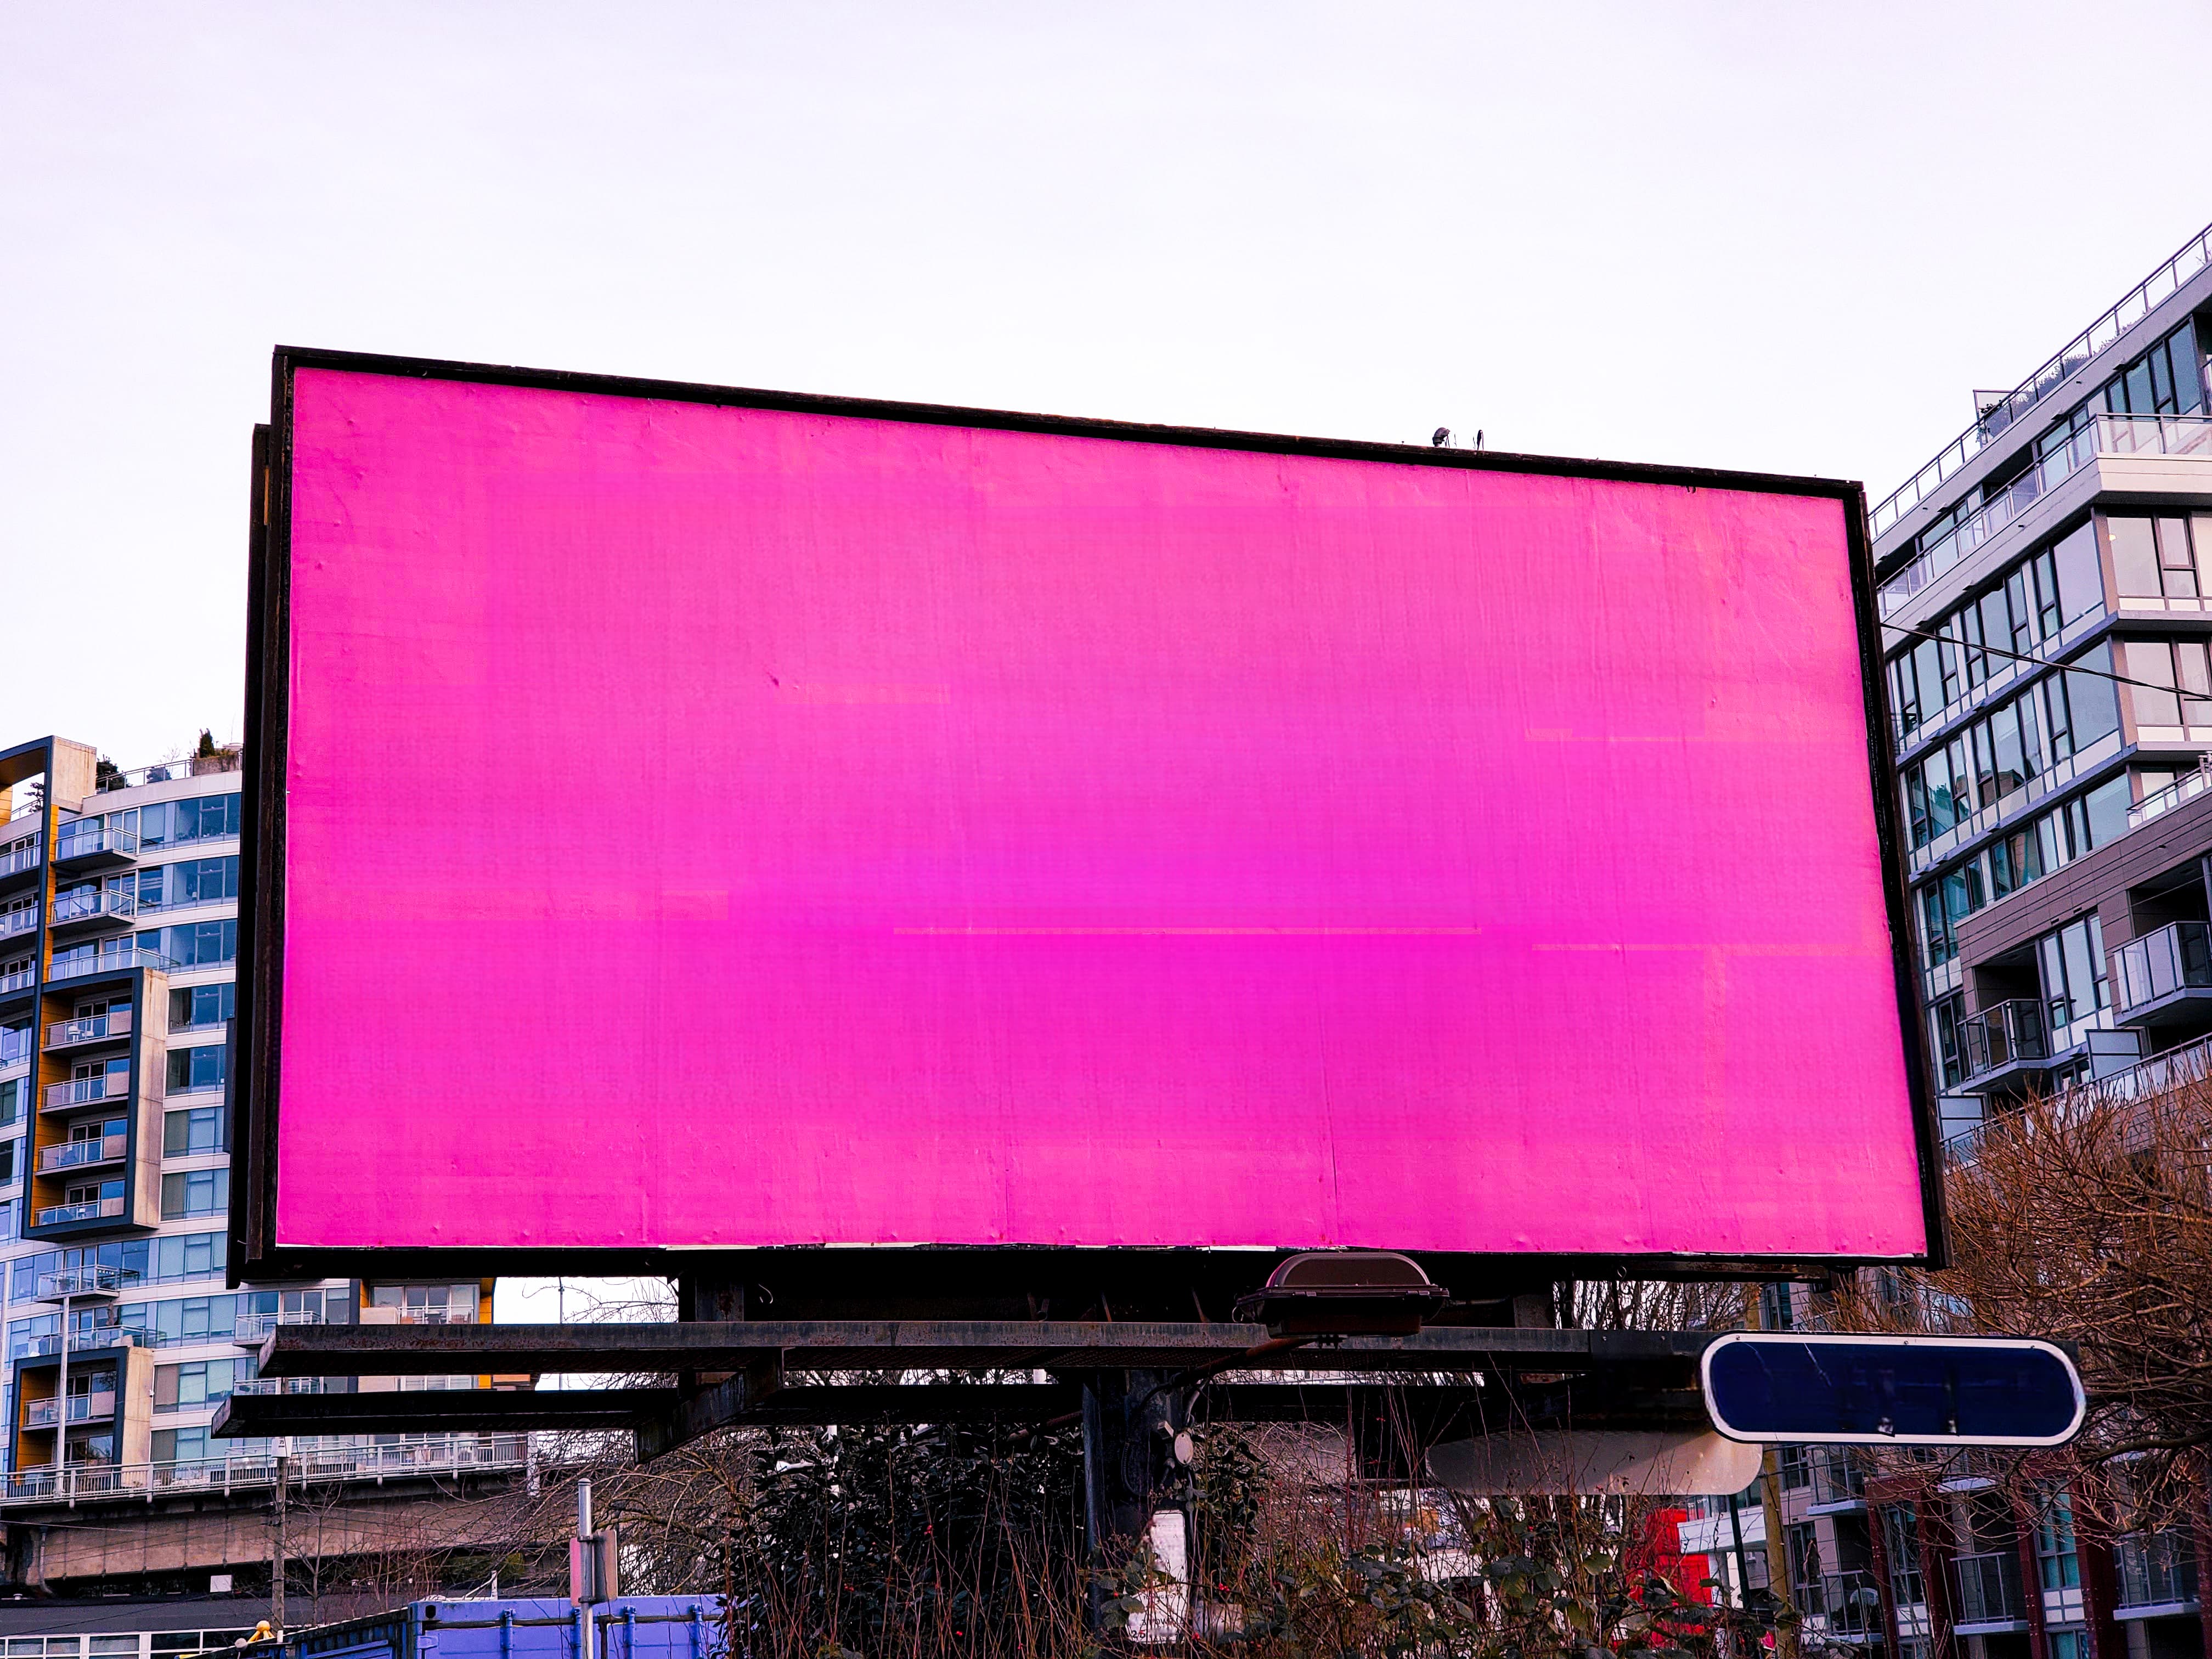 Example result showing a billboard where the text has been removed